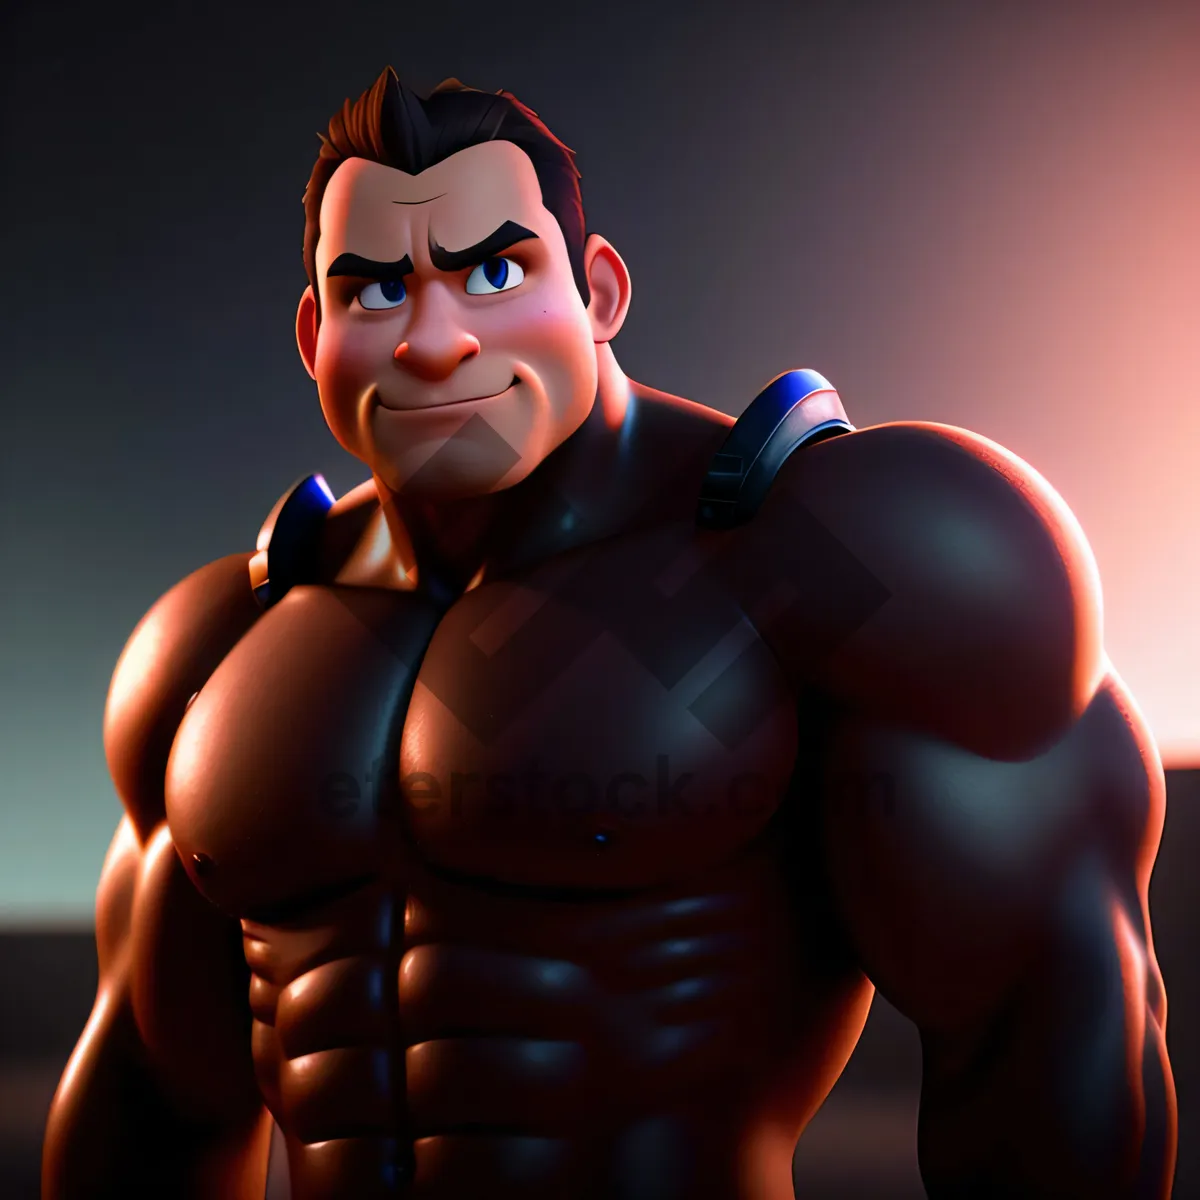 Picture of Muscular man in a playful cartoon style.